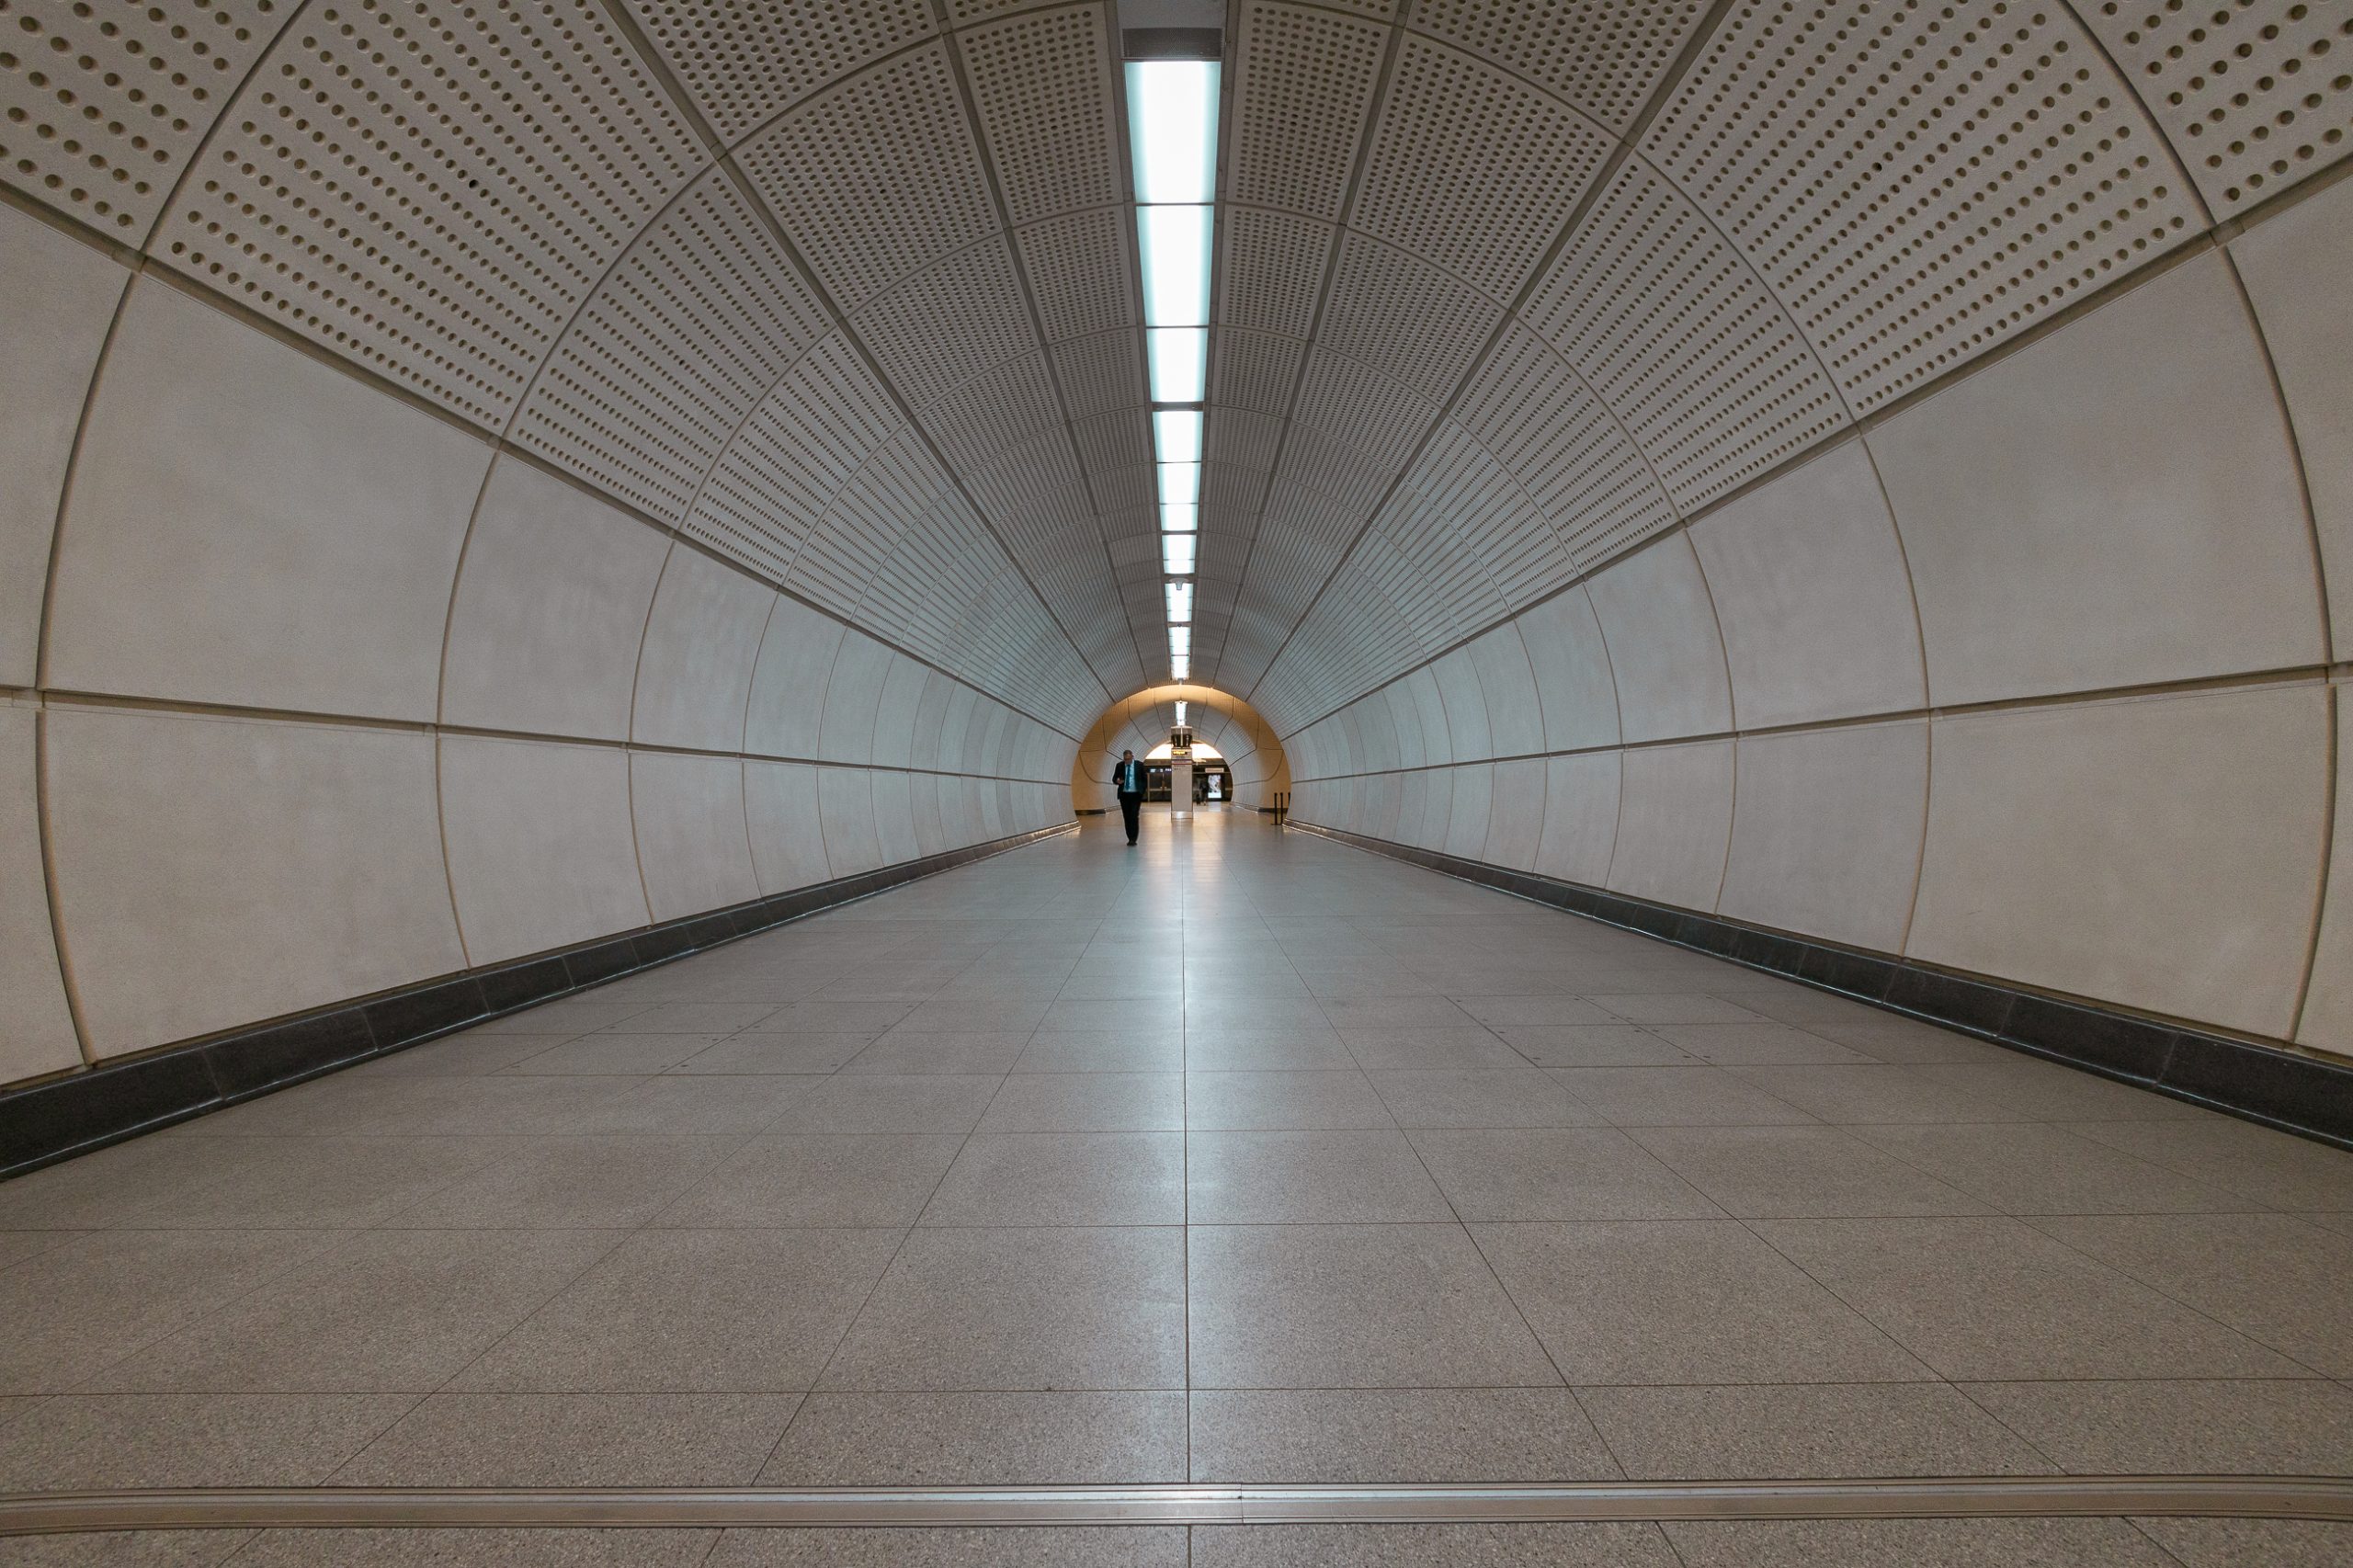 An image taken below standing waist height of a connecting tunnel between the Elizabeth Line platforms at Tottenham Court Road station. In the distance, a male figure approaches.